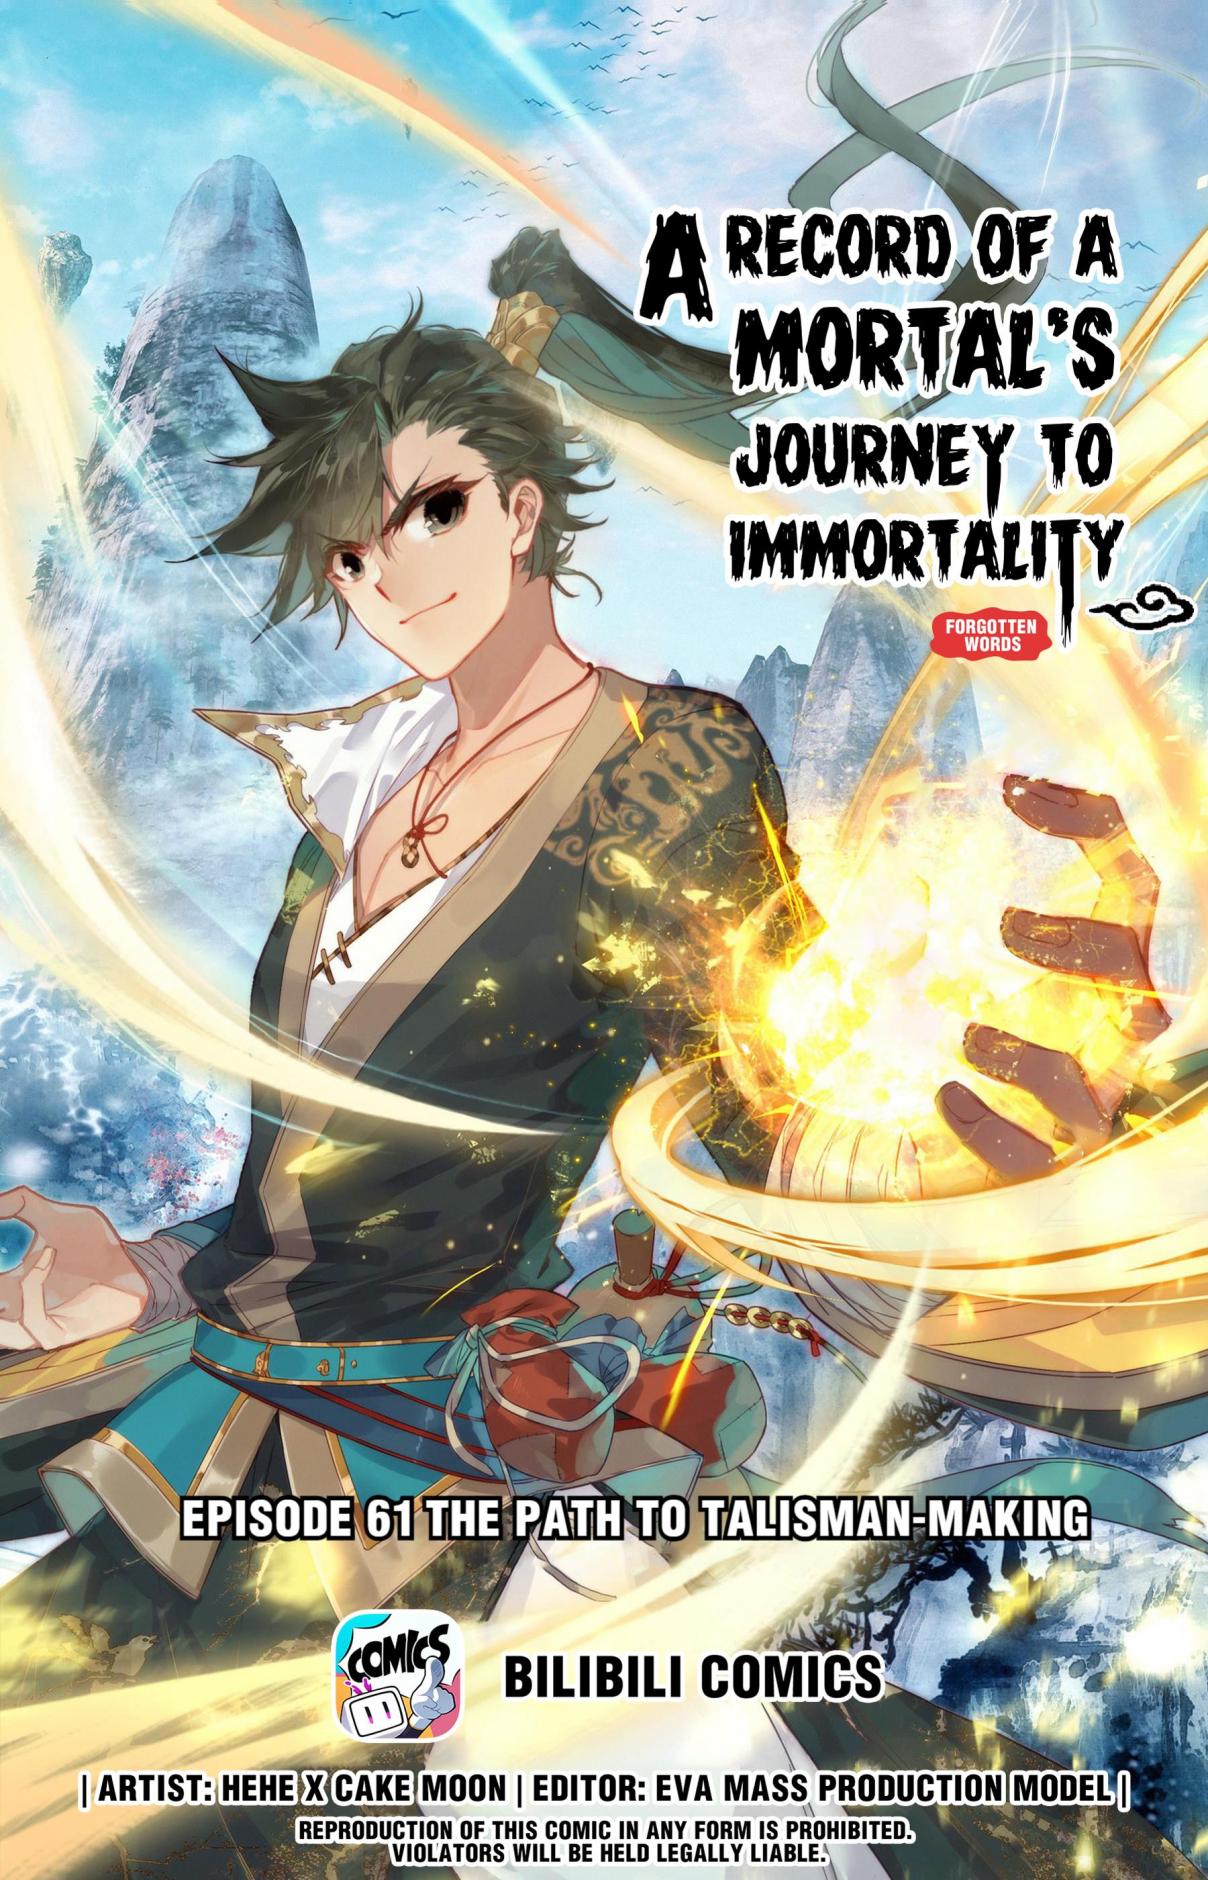 A Record of a Mortal's Journey to Immortality 61 The Path to Talisman-Making